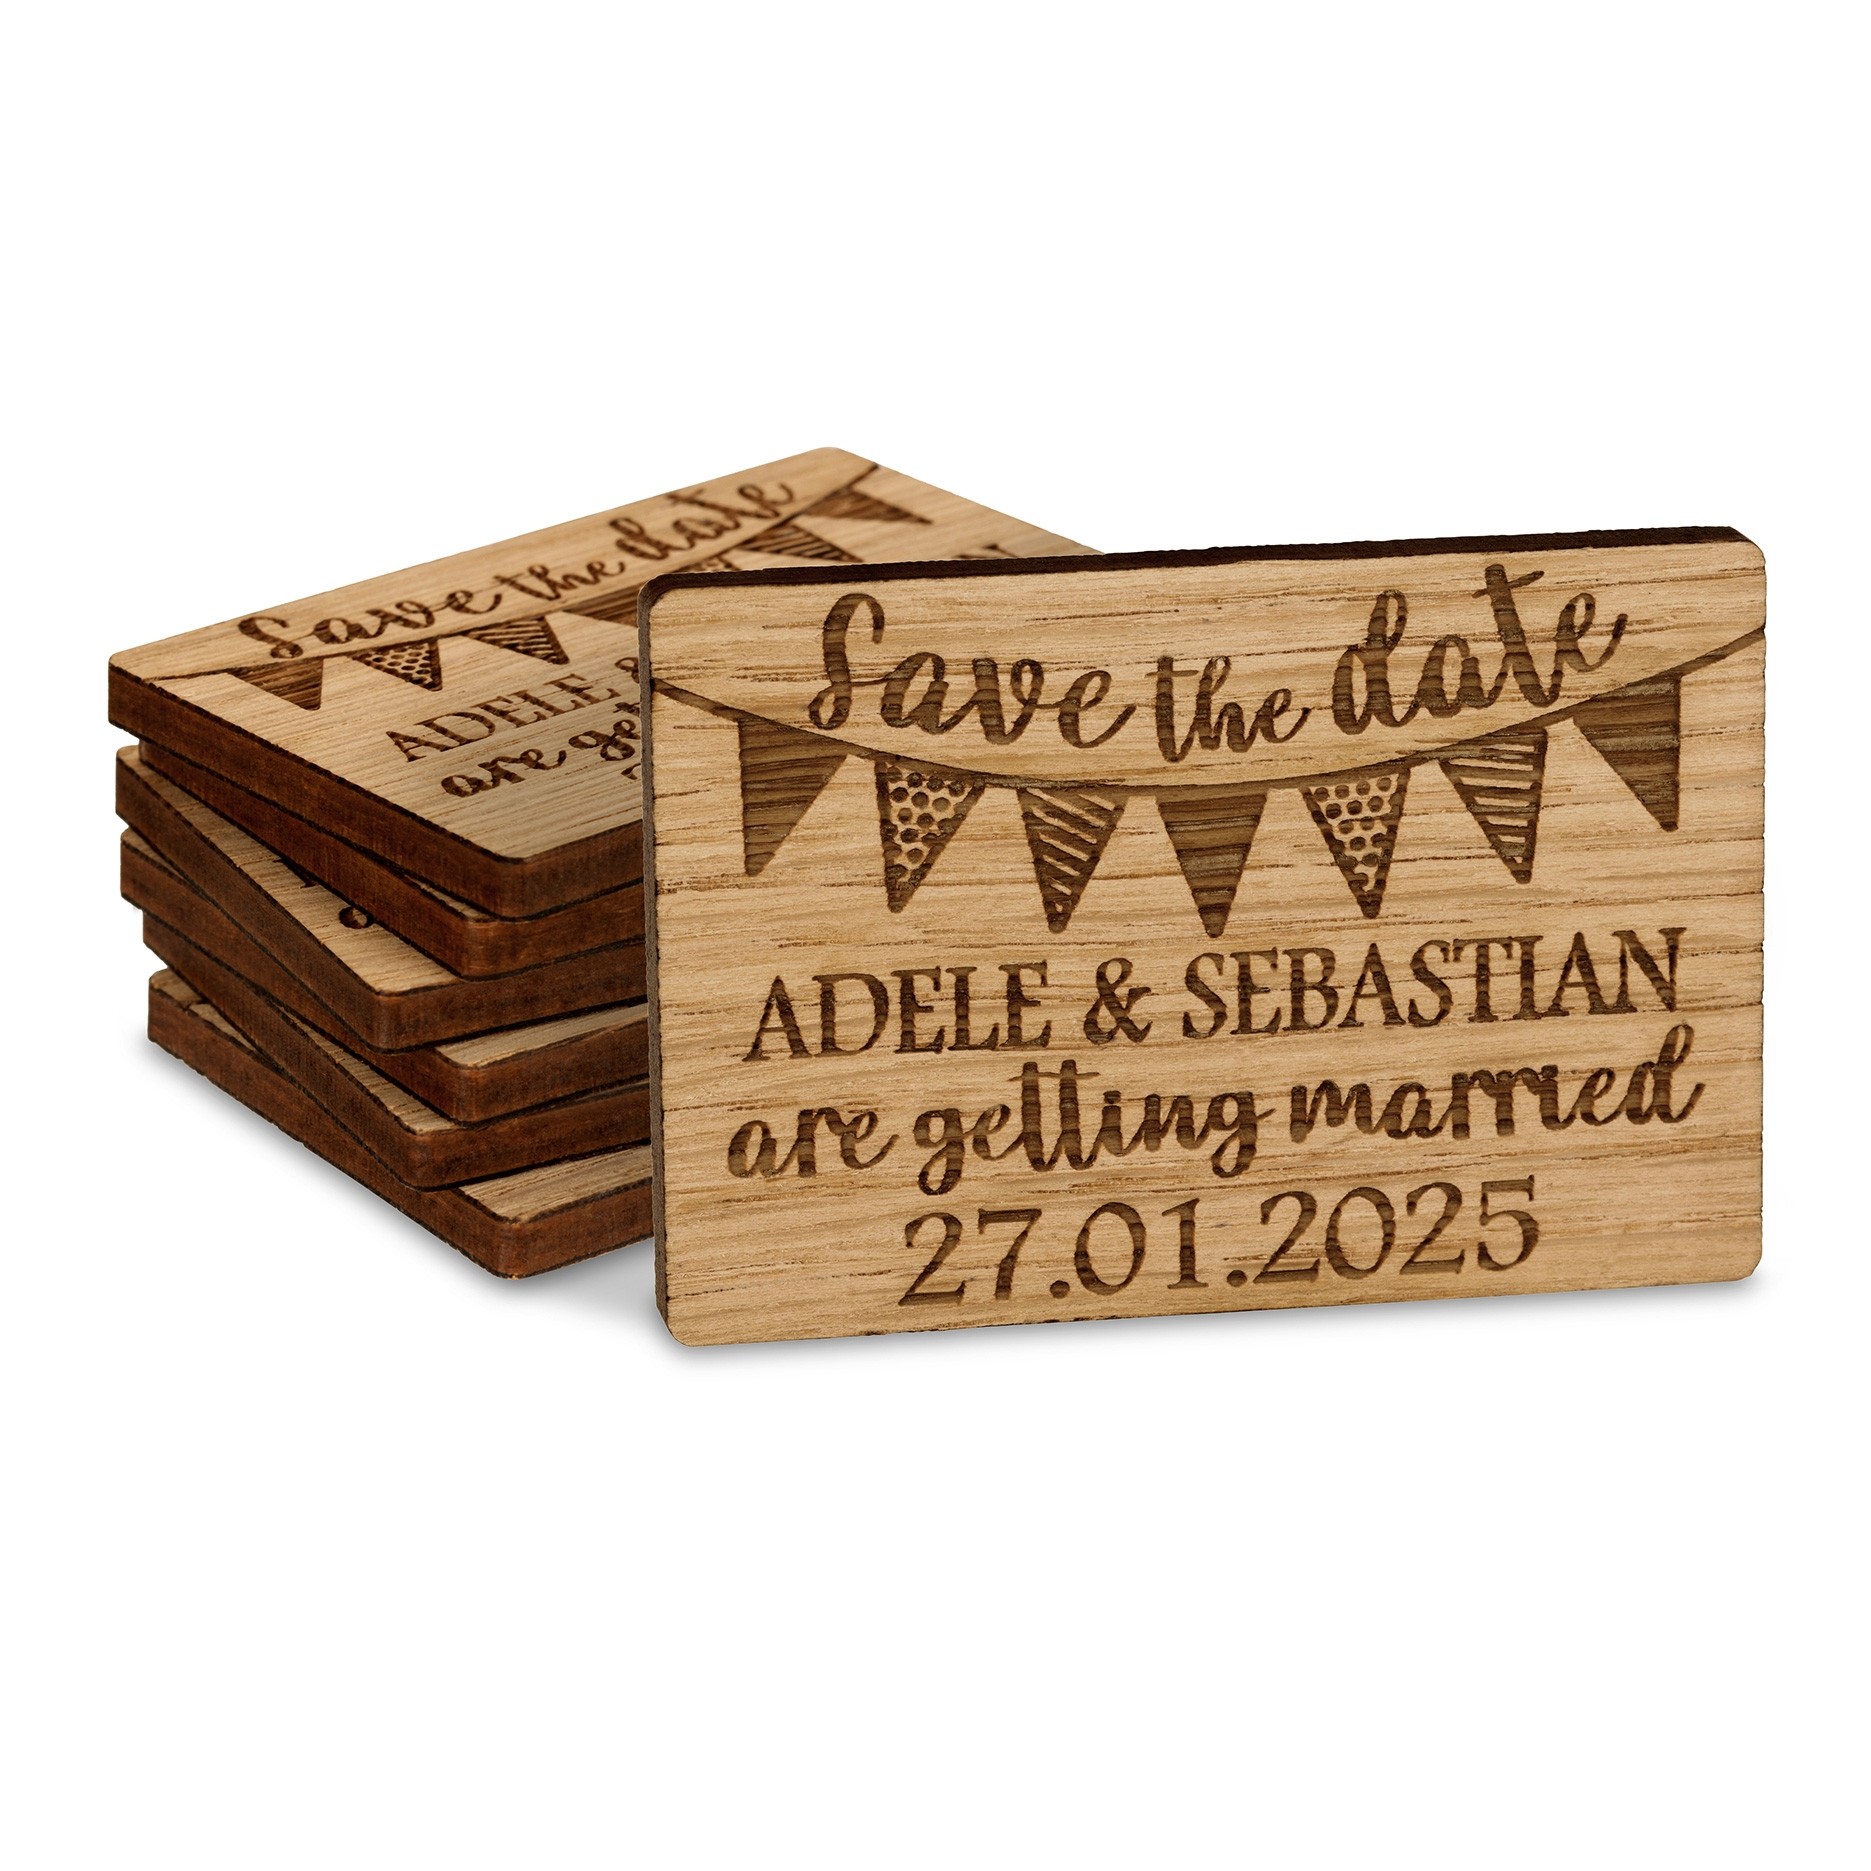 Personalised Wedding Save The Date or Evening Invitations Fridge Magnets Cards Bunting Envelopes Wooden Favours Charms Rustic Oak Custom